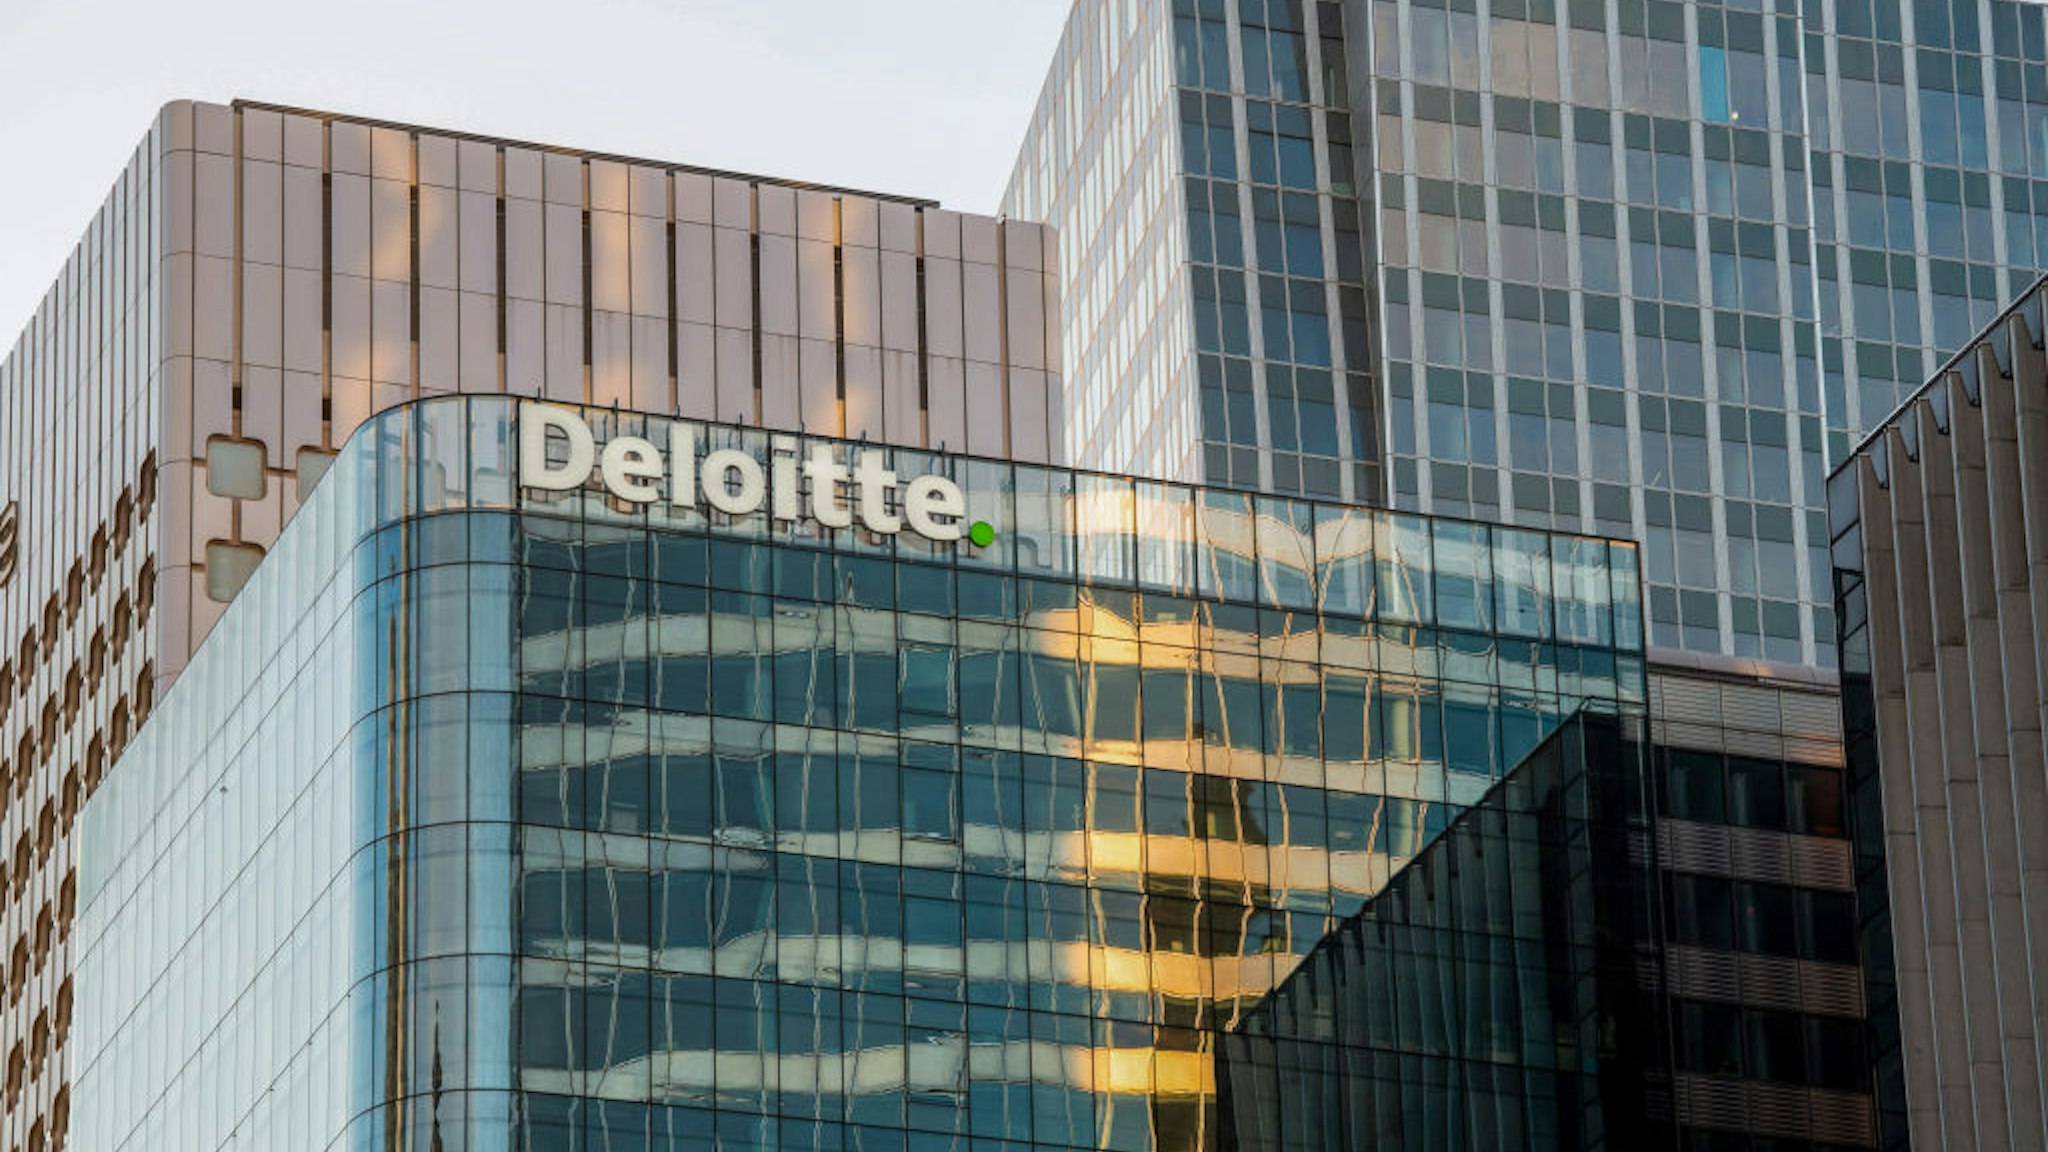 The Deloitte logo outside the Deloitte LLP office building in the La Defense business district of Paris, France, on Monday, Nov. 9, 2020. France's economy will take a smaller hit from the new lockdown to contain the spread of Covid-19 than it did during the tighter restrictions on activity earlier this year, according to the countrys central bank.